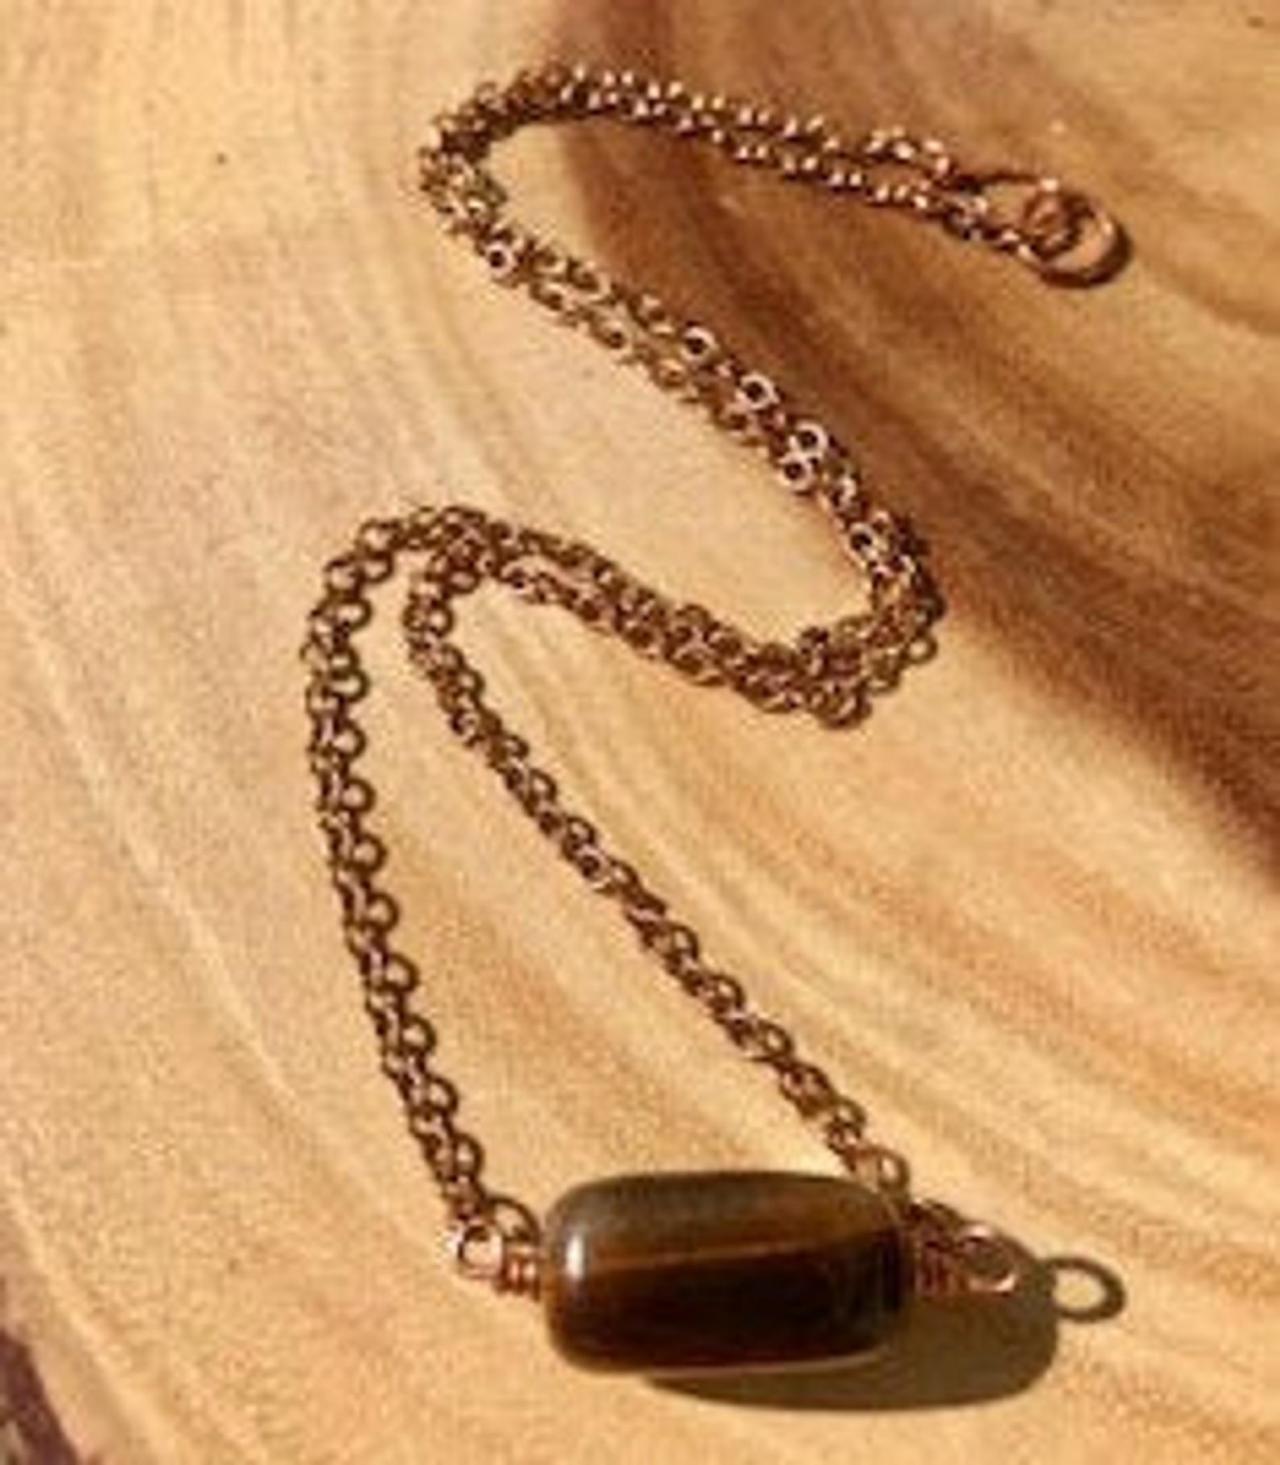 Tiger's Eye Necklace; Copper Necklace With Tigers Eye; Crystal Jewelry; Copper With Tiger's Eye Jewelry; Tigers Eye Crystal